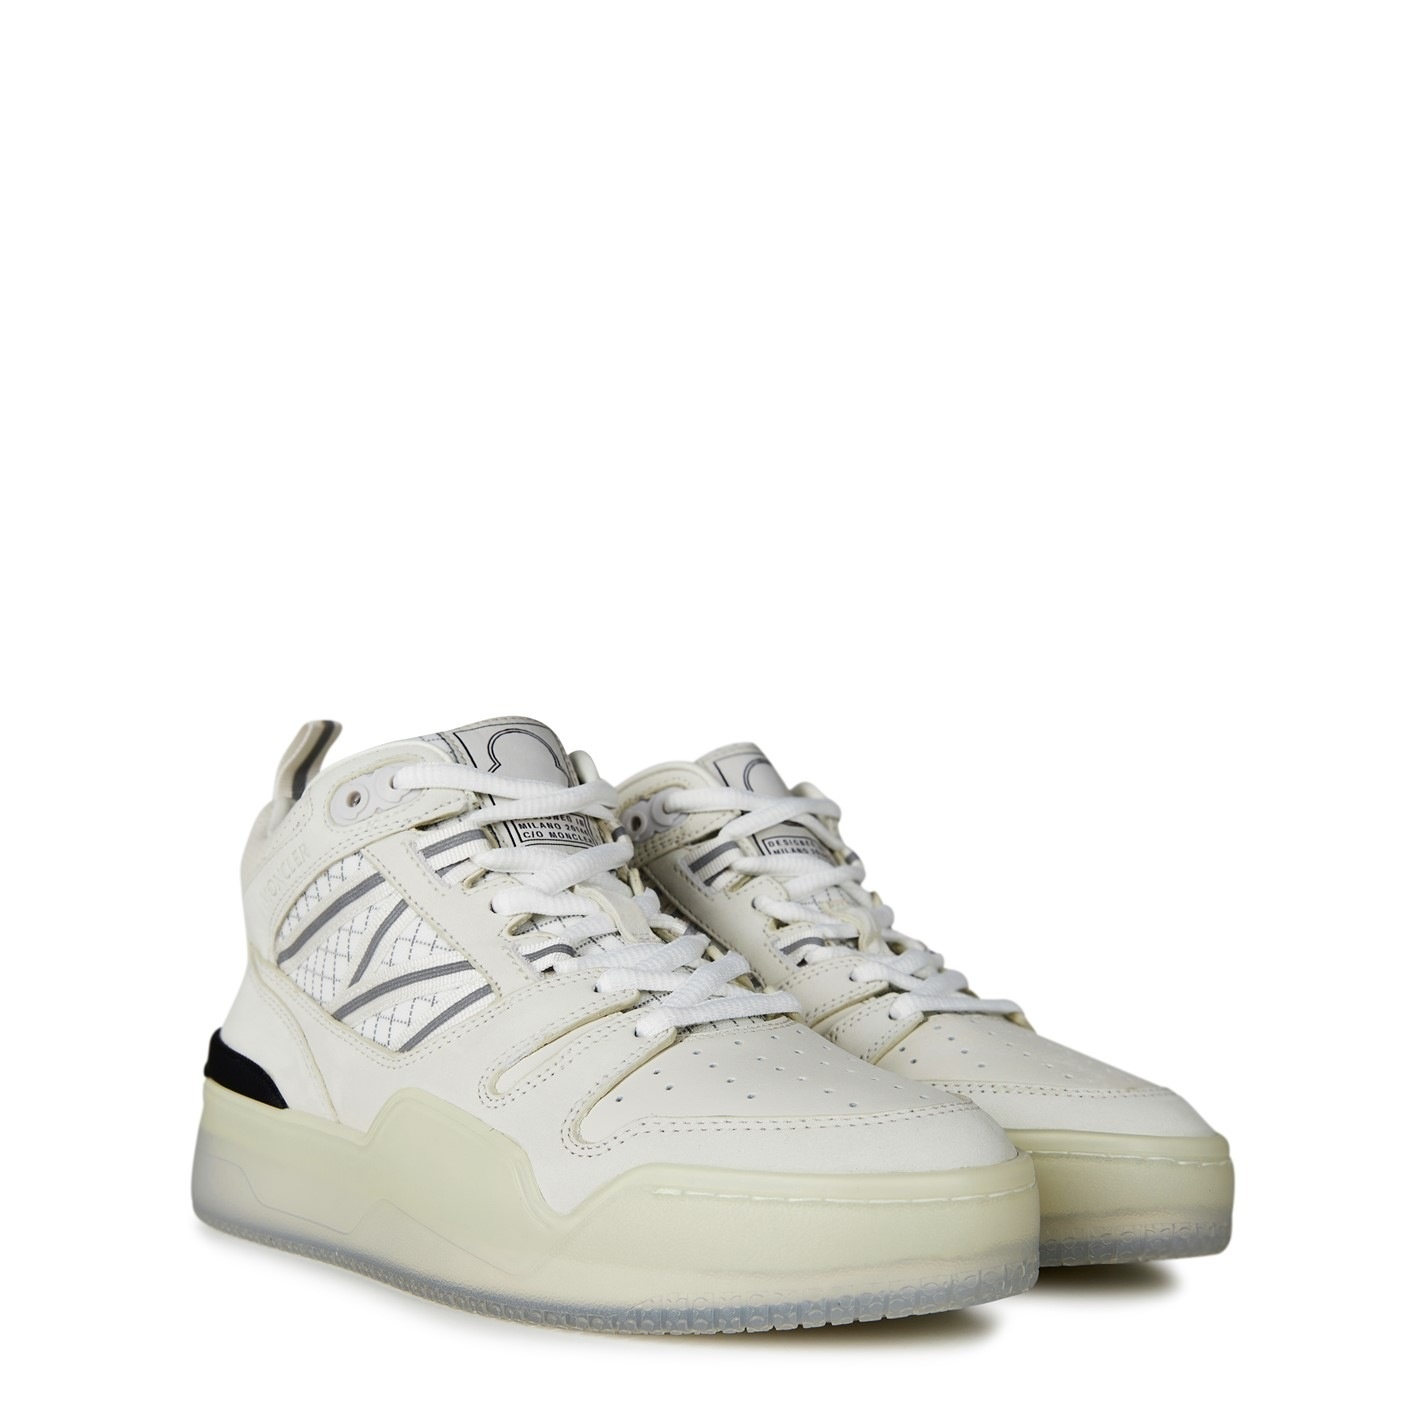 PIVOT LEATHER HIGH TOP SNEAKERS - 4